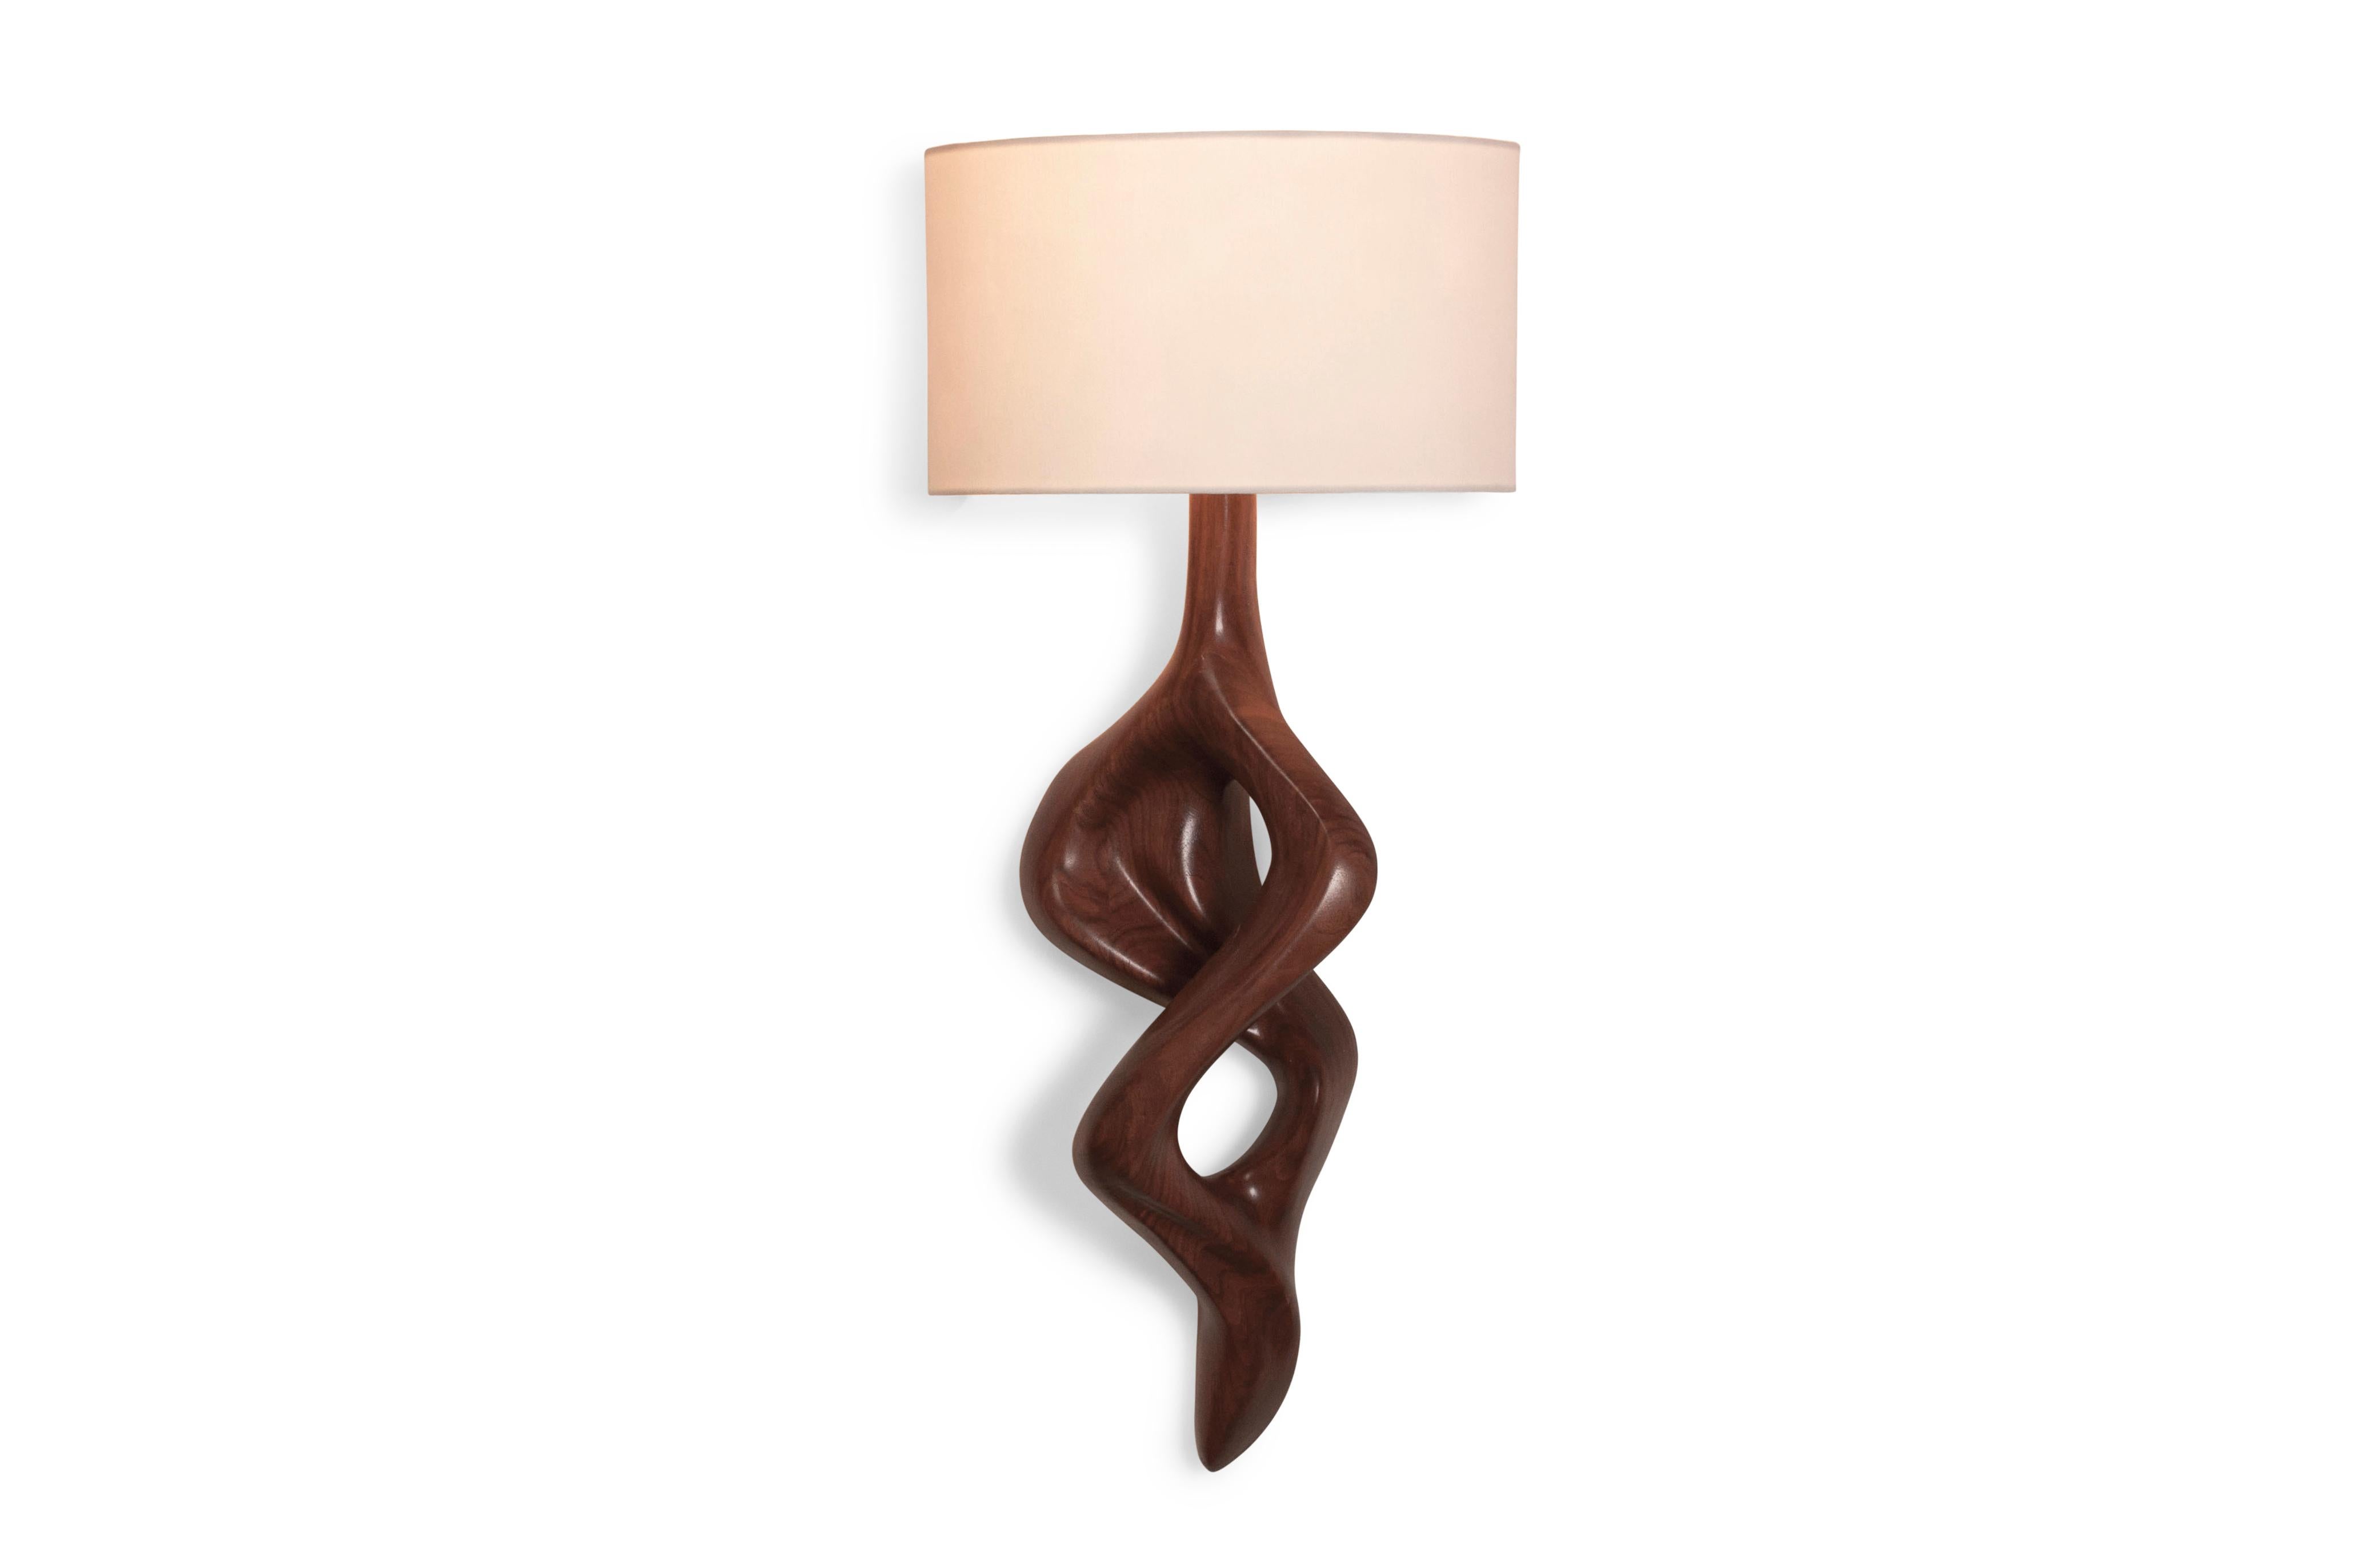 Nomi Sconce is carved from solid wood walnut with half a drum shape shade. Shade dimensions: 12